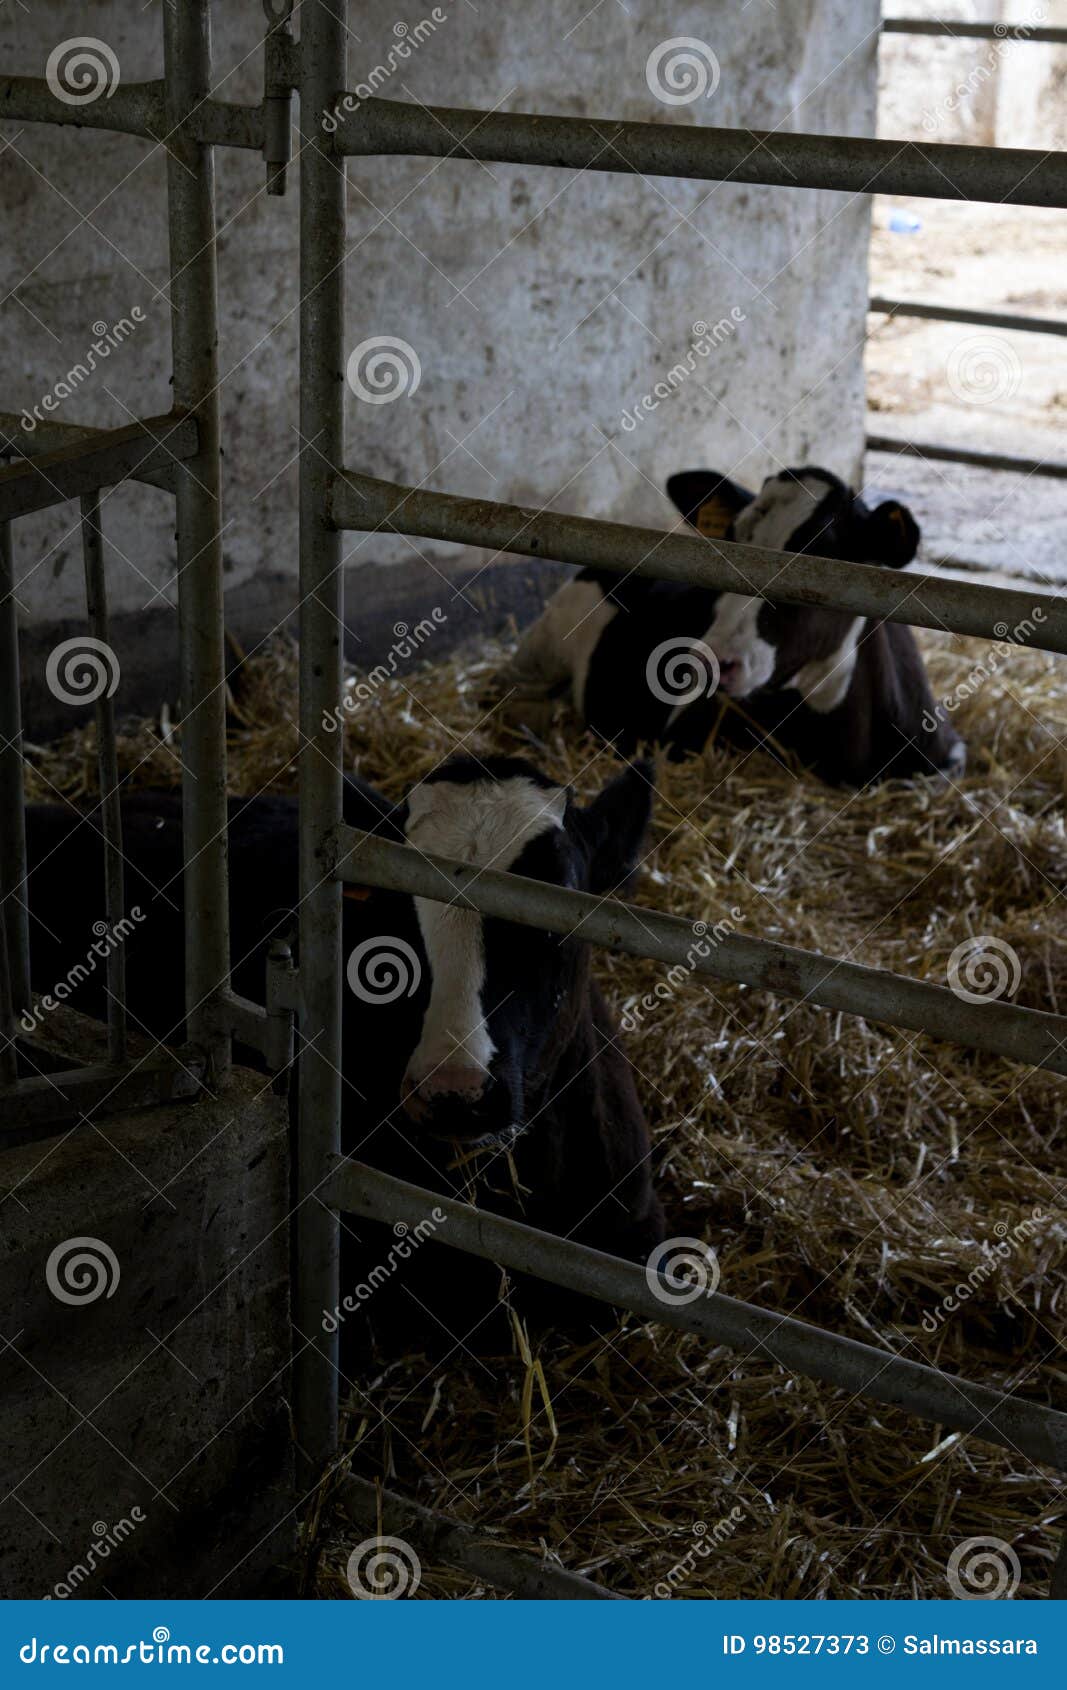 cows relaxed in a cowshed